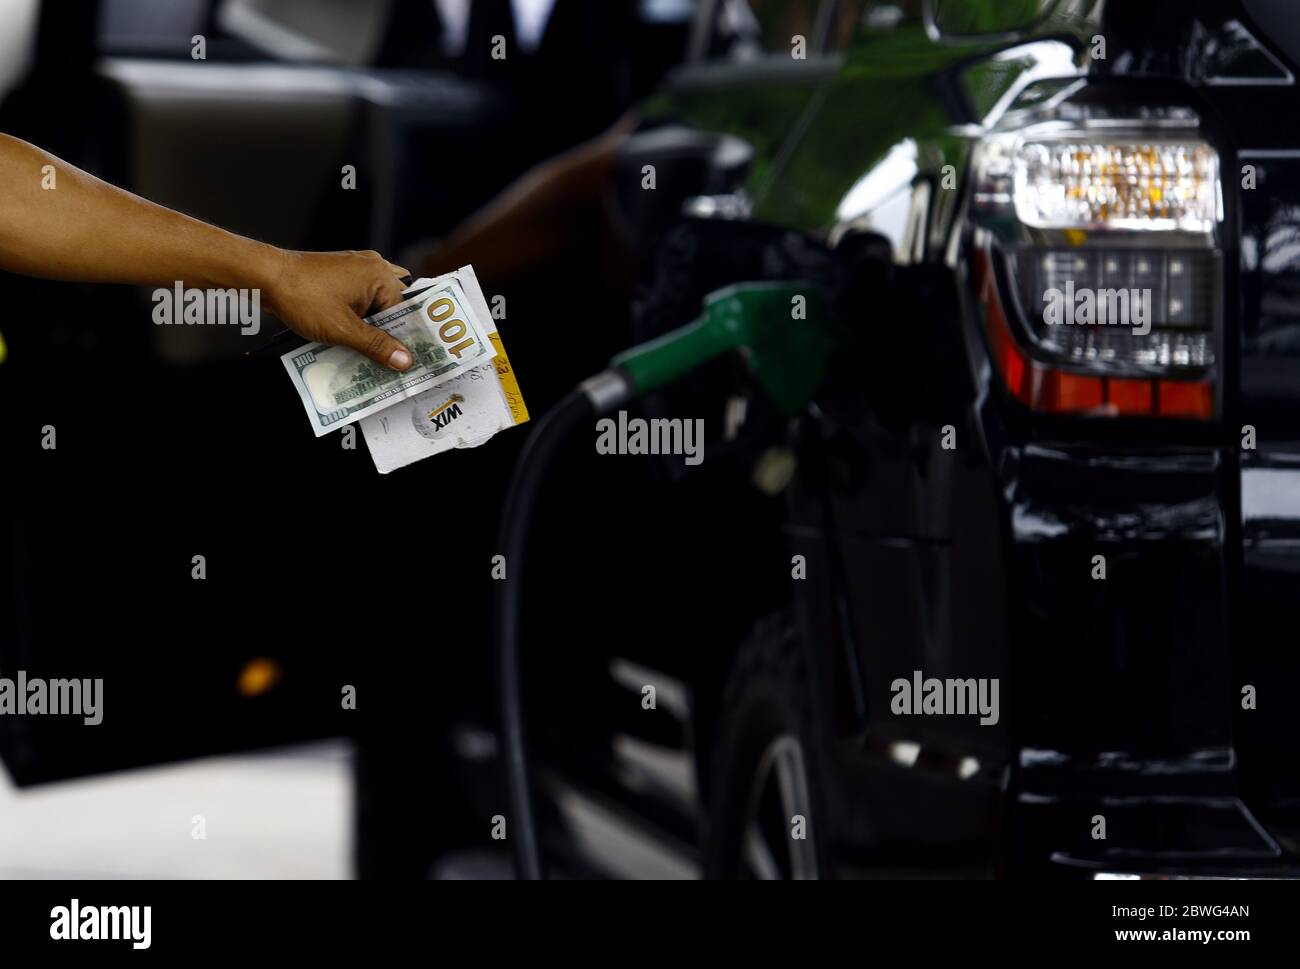 June 1, 2020, Valencia, Carabobo, Venezuela: June 01, 2020. Vehicles line up to fill gas. As of June 01, gasoline in Venezuela begins to be charged at international prices (0.50. $ US per liter) Pudi. Endo being paid in Dollars, Euros, Petro or Bolivares sovereigns at the exchange of the day. The minimum wage is approximately $ 5 per month. There is the subsidized fuel modality of sovereign Bolivares 5mil per liter with a maximum of 120 liters per month and controlled by the home system of the Nicolas Maduro government and the gas stations that offer this subsidy are located in popular areas o Stock Photo